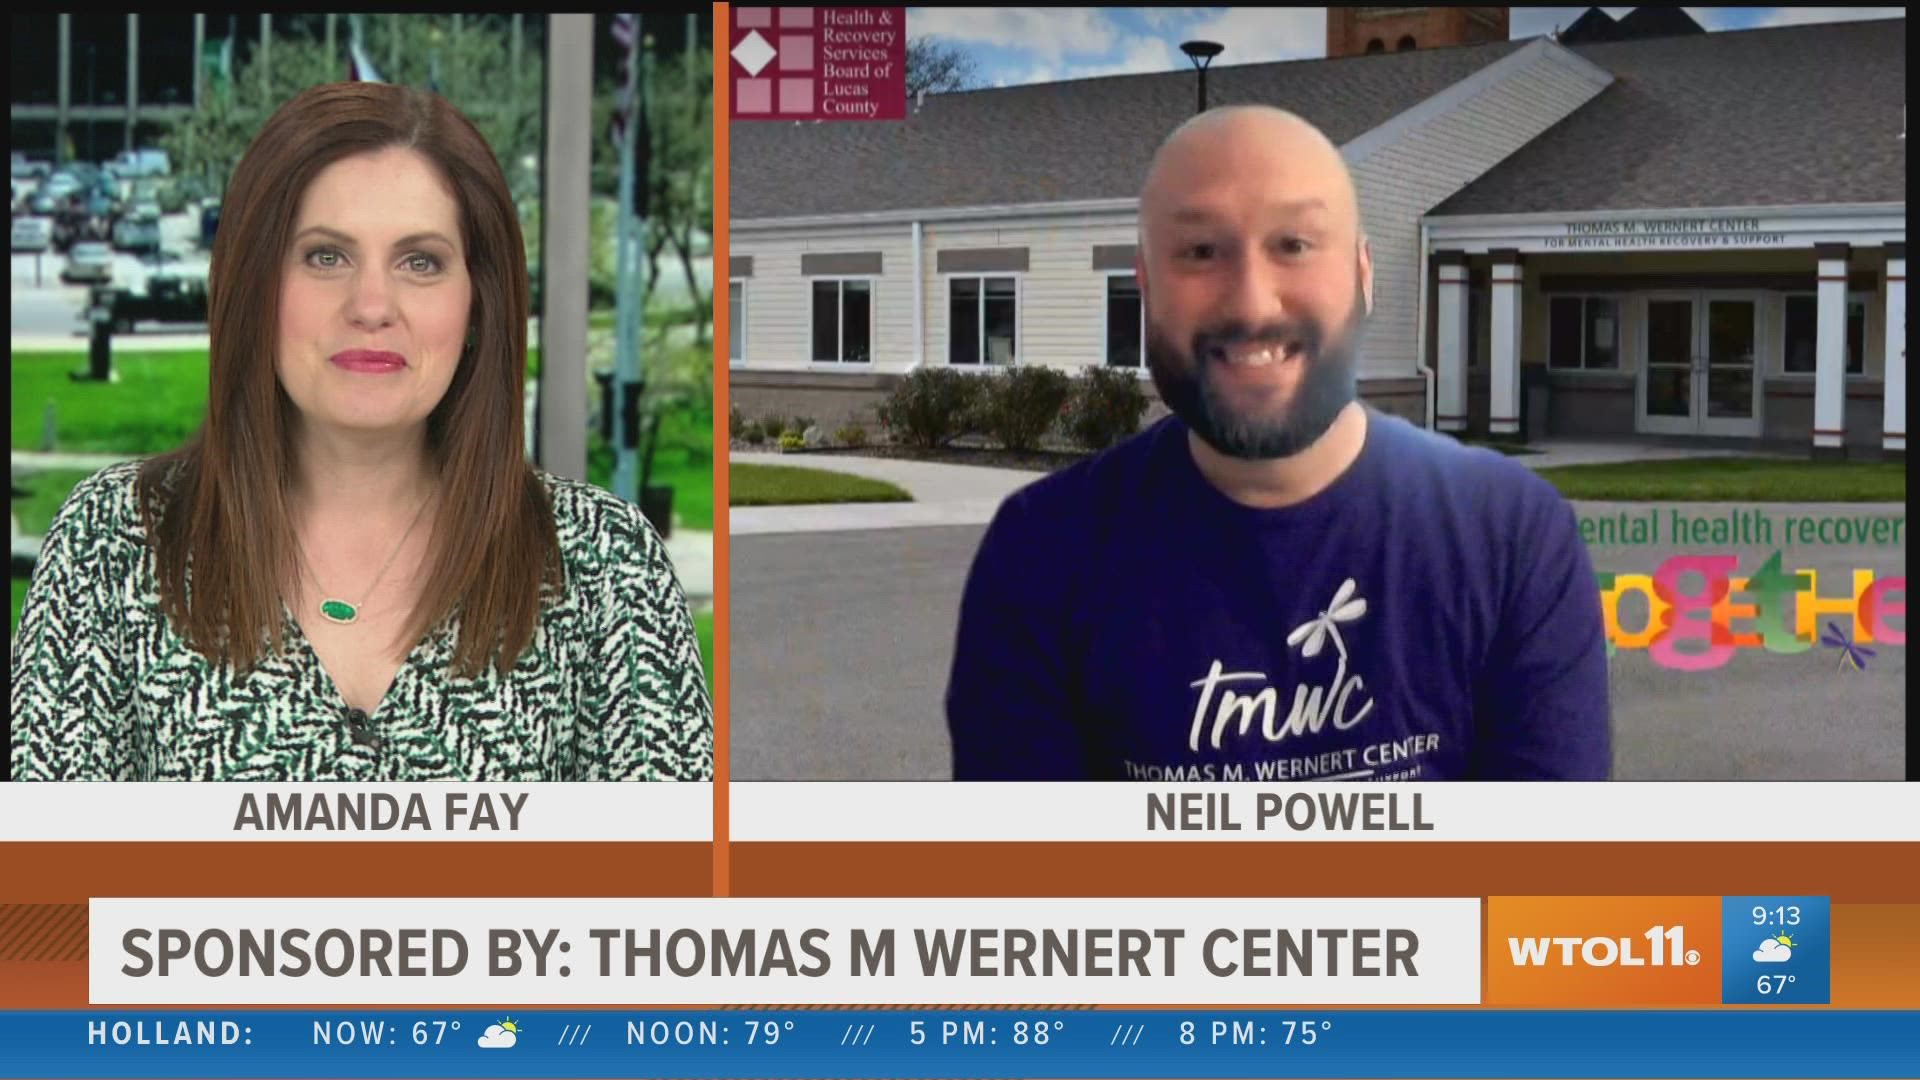 Neil Powell, Expressive Arts coordinator with the Thomas M. Wernert Center in Toledo, is here to explain why art is so great for our mental health.